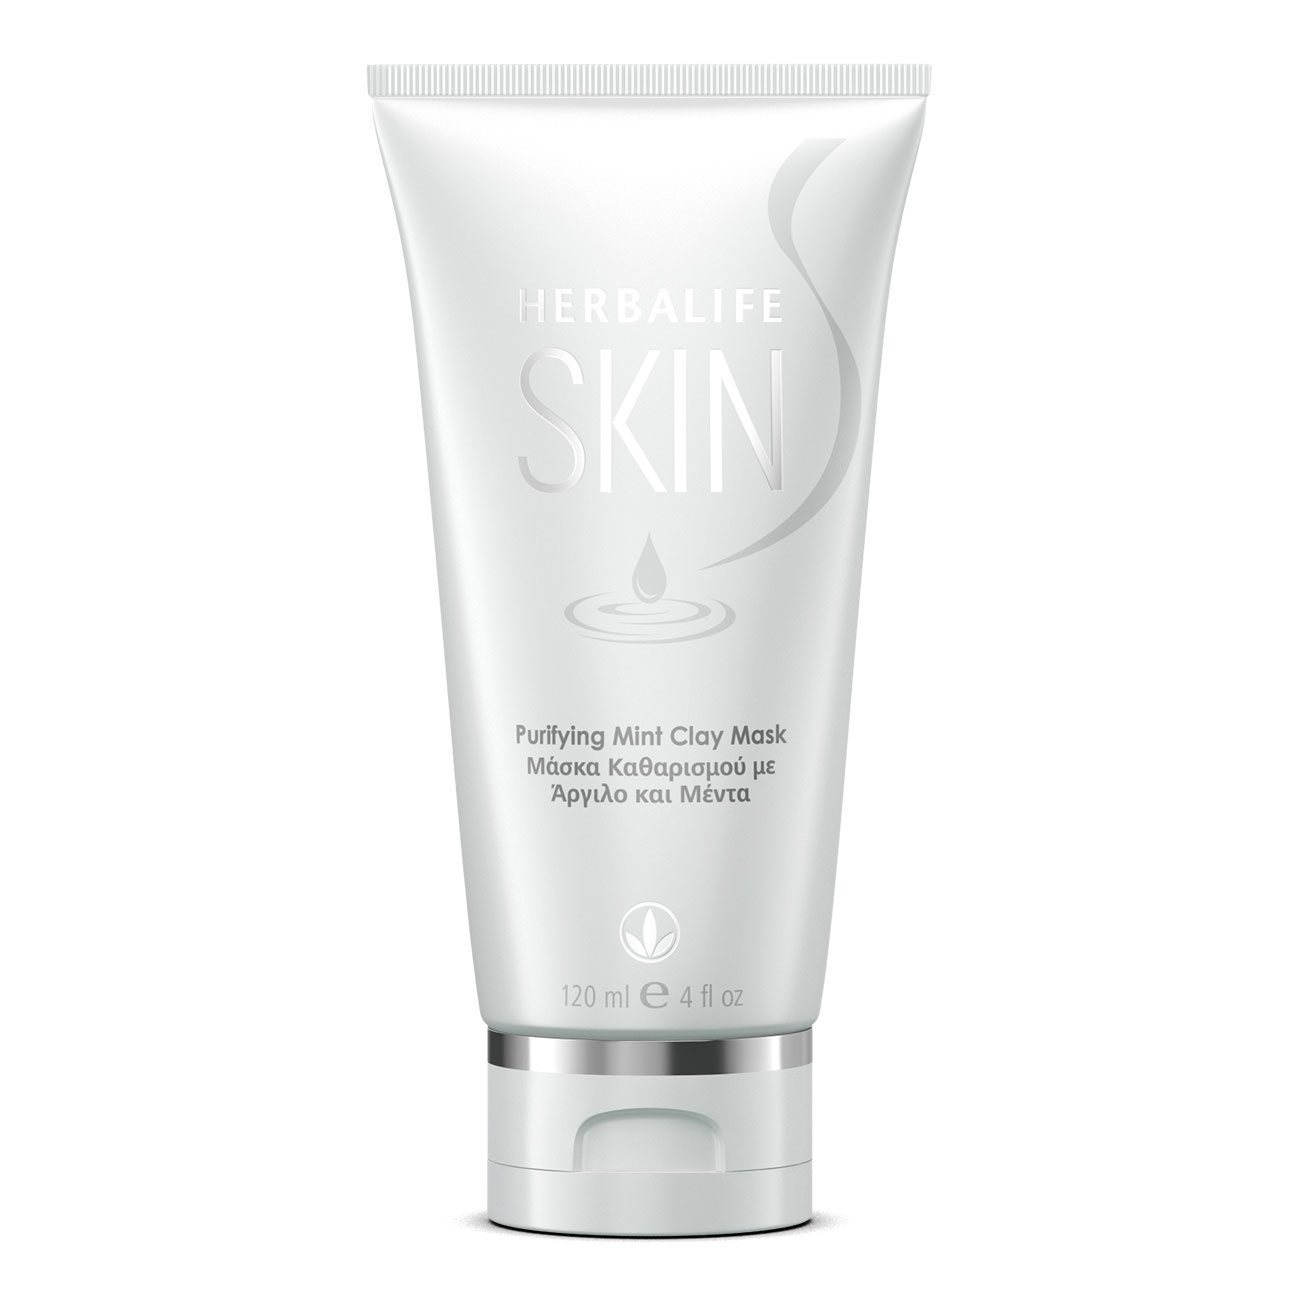 Herbalife SKIN Purifying Mint Clay Mask  produkt